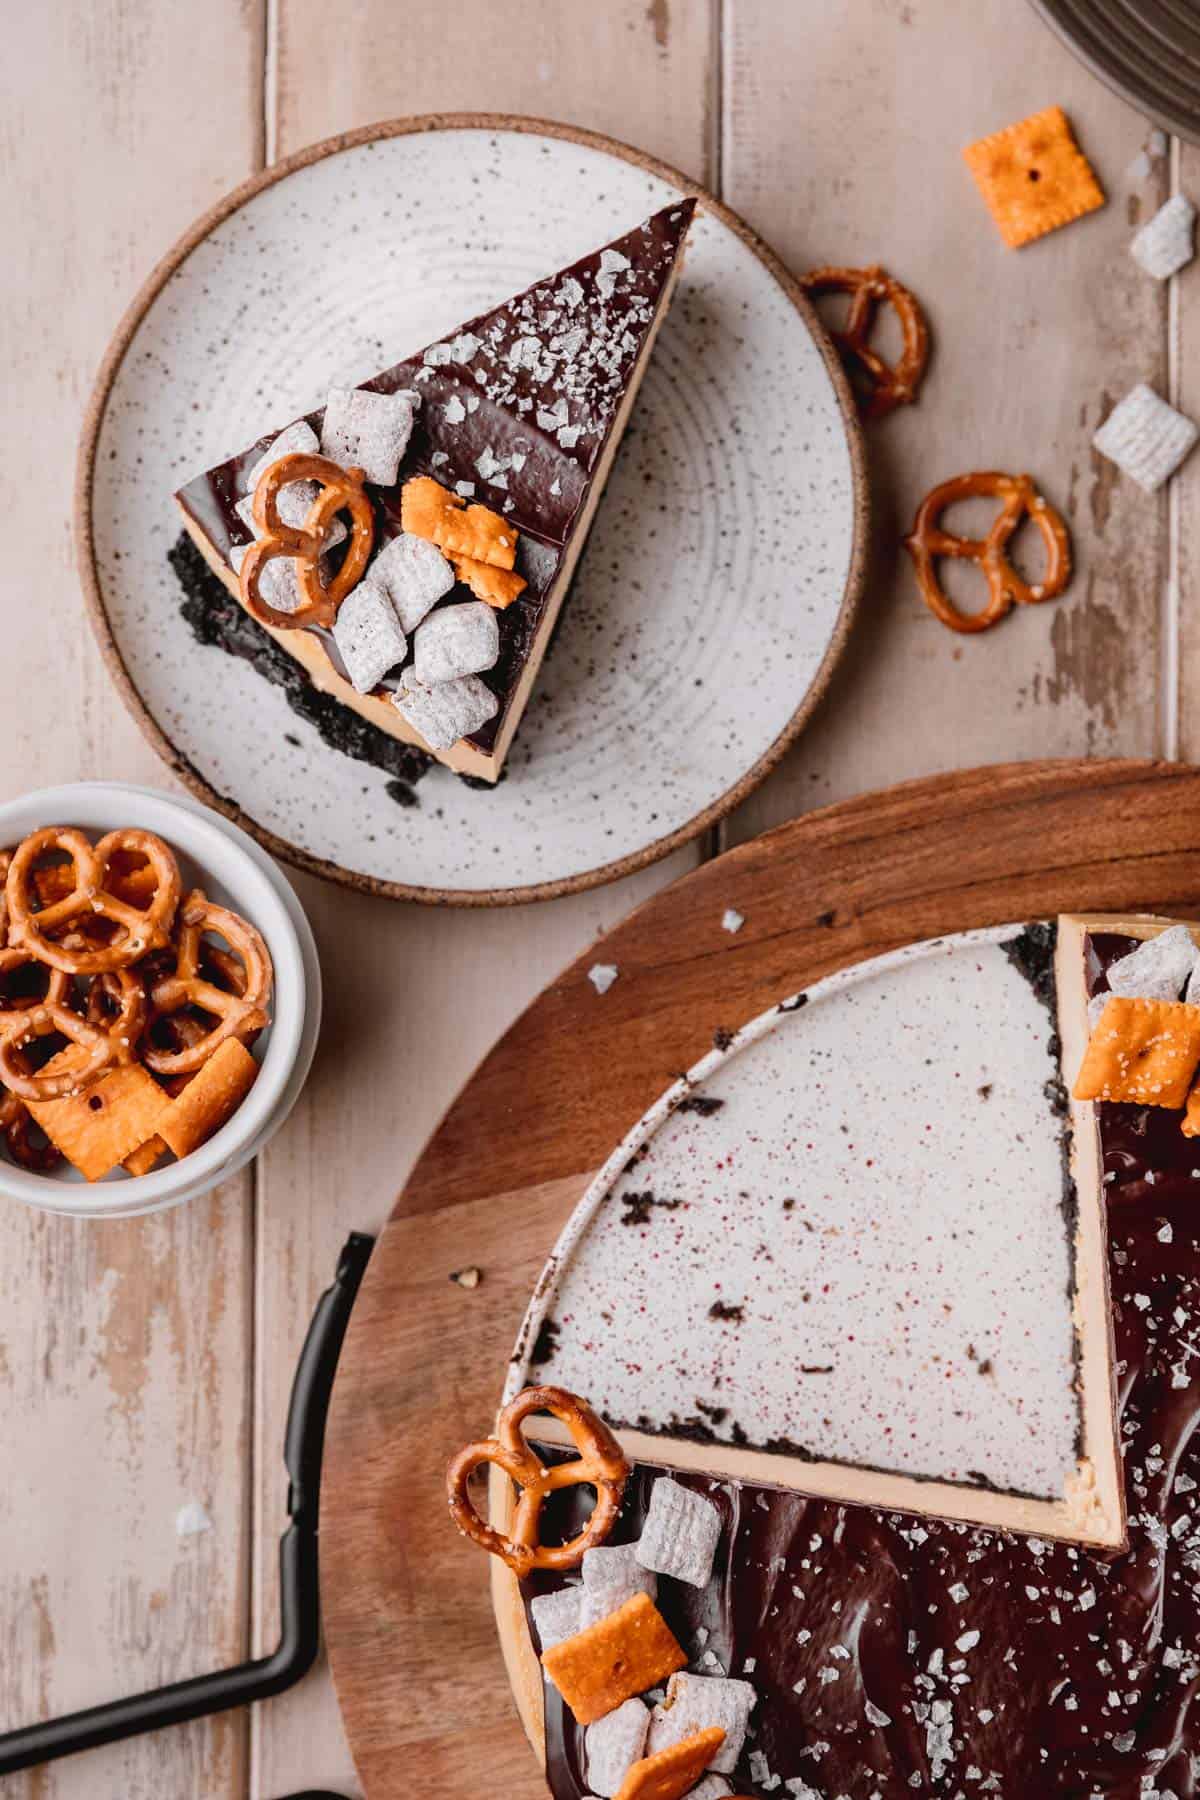 A slice of Chocolate Peanut Butter Cheesecake on a plate next to the whole cheesecake.